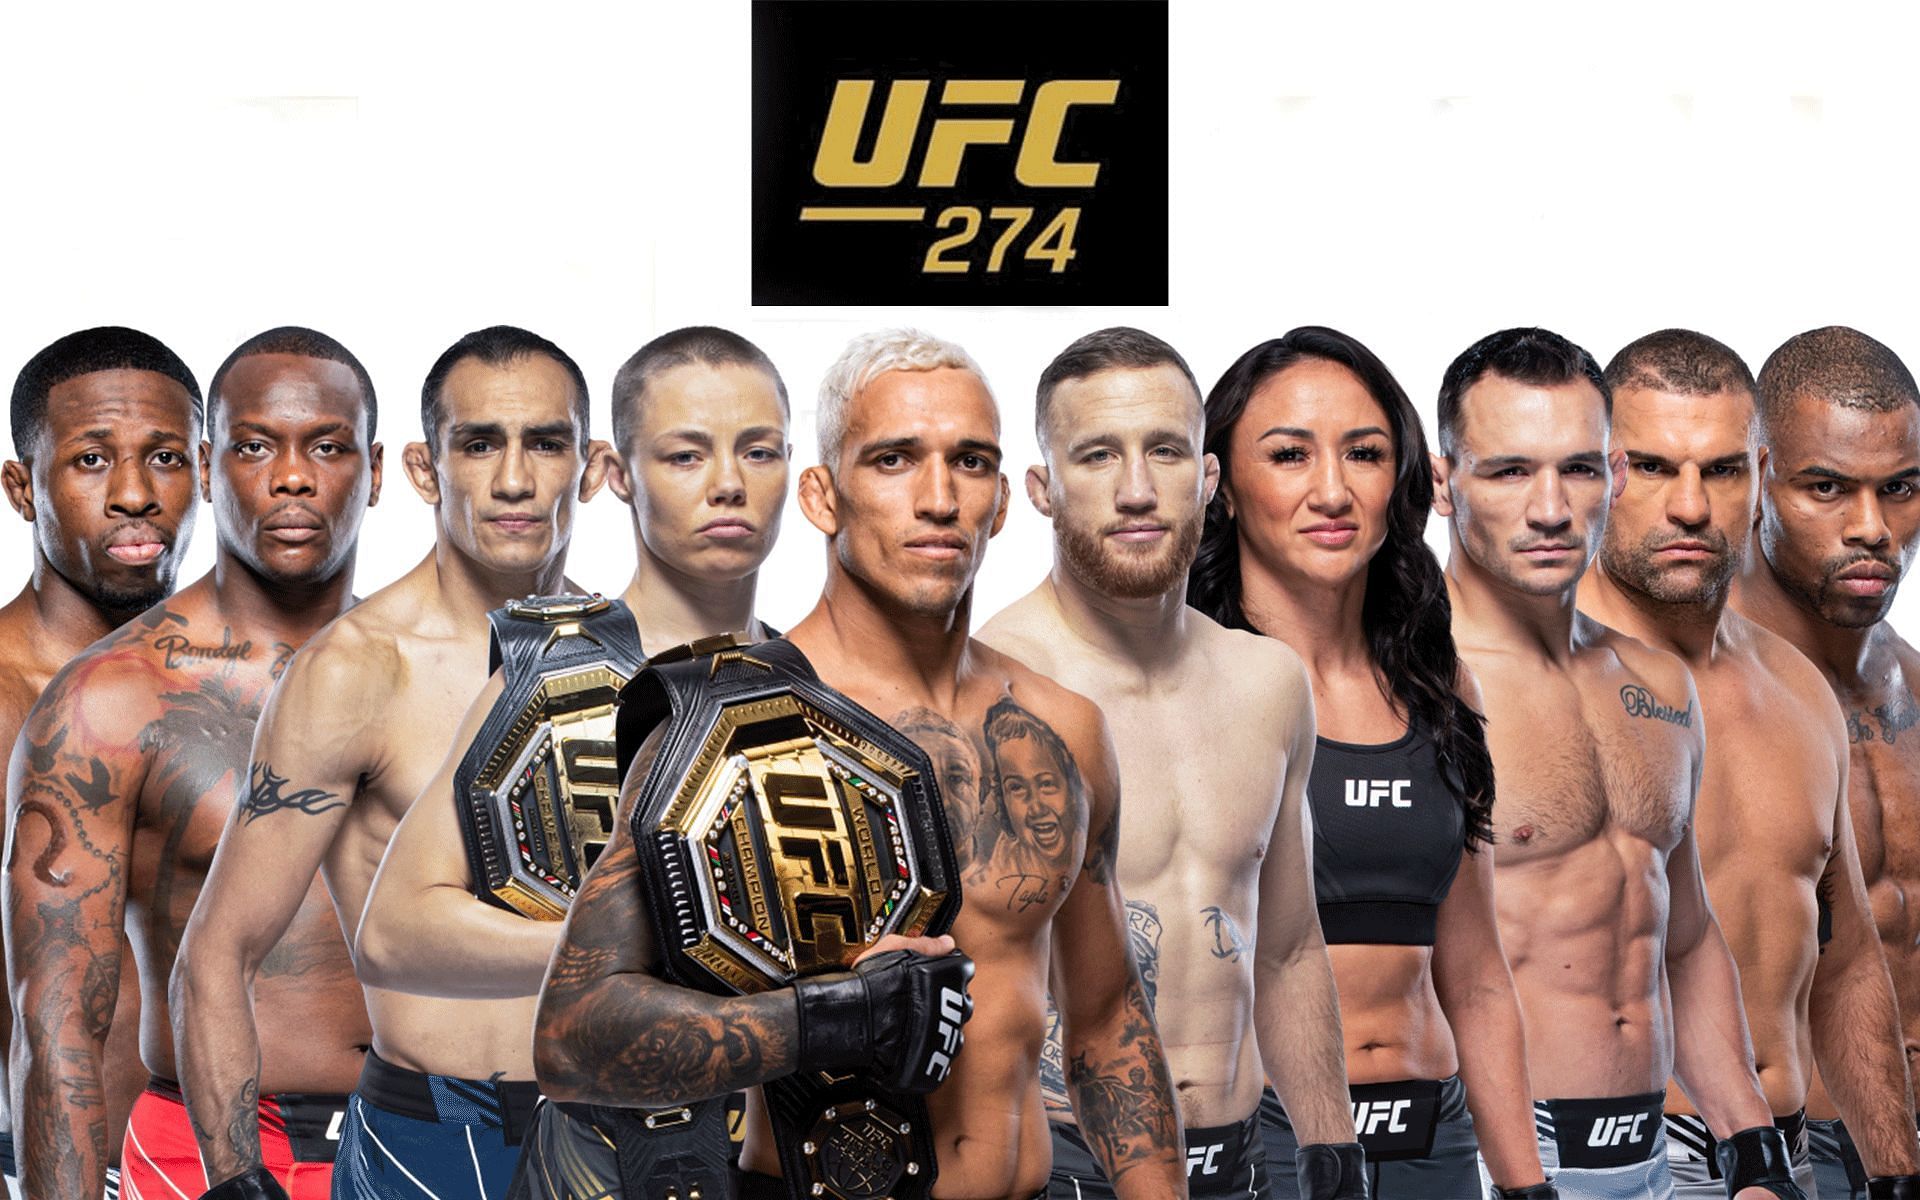 UFC 274 was headlined by Charles Oliveira and Justin Gaethje [Image credits: ufc.com]